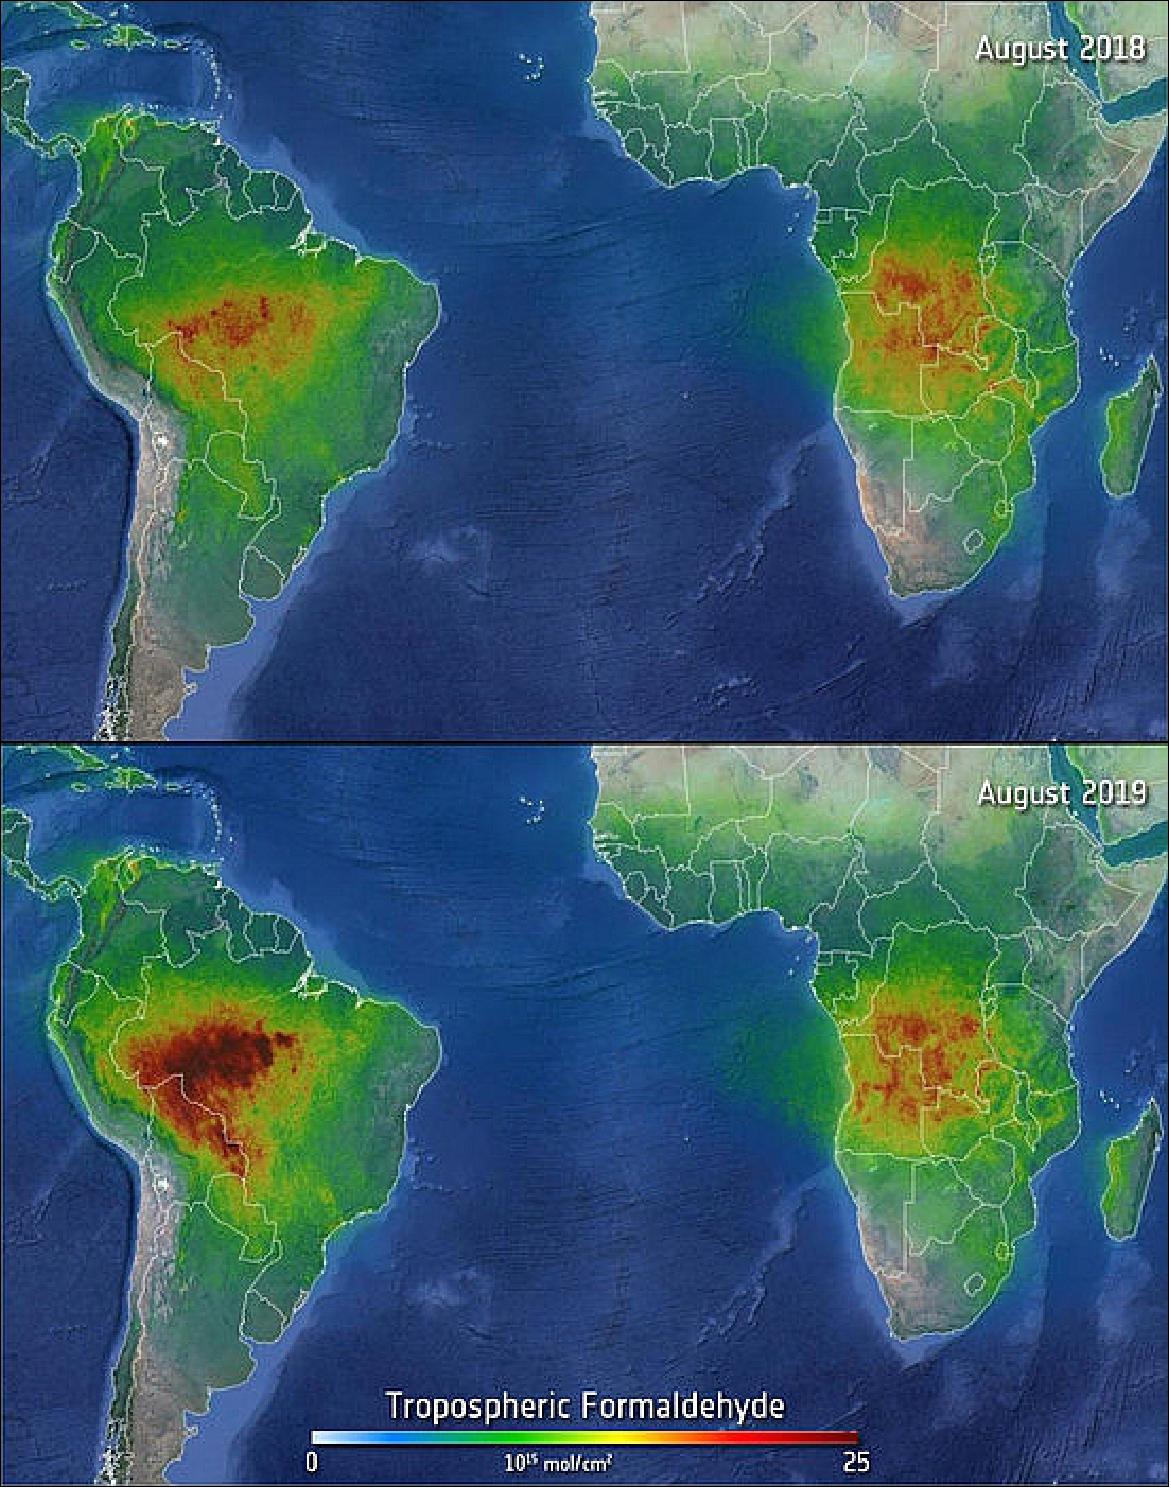 Figure 7: Using data from the Copernicus Sentinel-5P mission, the image shows how much formaldehyde was released from wildfires in Brazil in August 2019 compared to August 2018. The image also features Africa, which and has also experienced fires. Formaldehyde is an important intermediate gas in the oxidation of methane and other hydrocarbons. While it is short-lived in the atmosphere, it reacts chemically to become a major source of carbon monoxide – another harmful pollutant (image credit: ESA, the image contains modified Copernicus data (2018/2019), processed by BIRA-IASB)